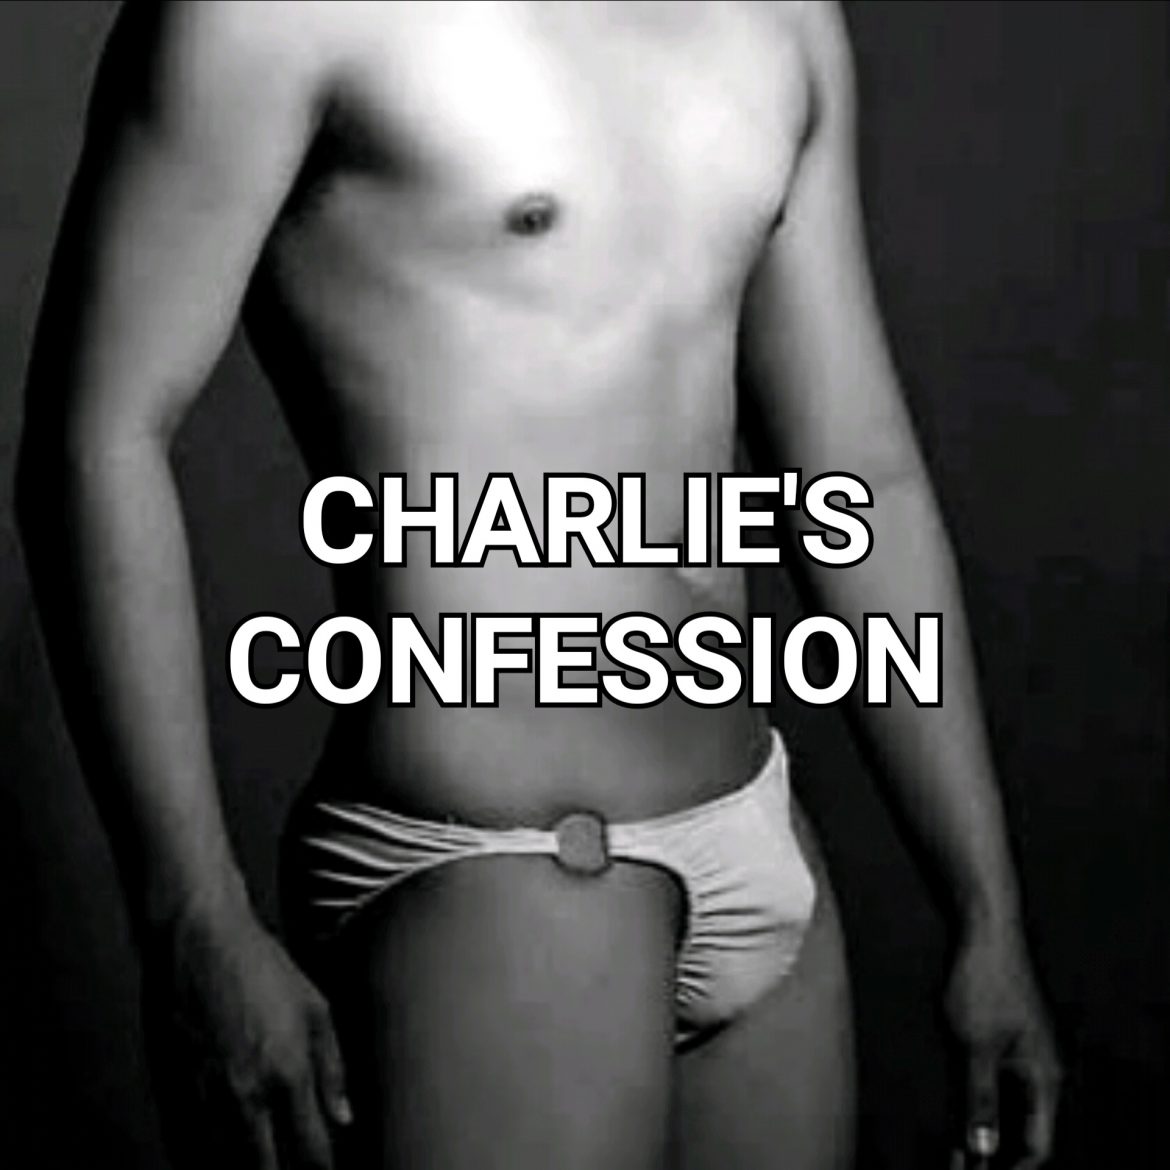 Charlie’s Confession